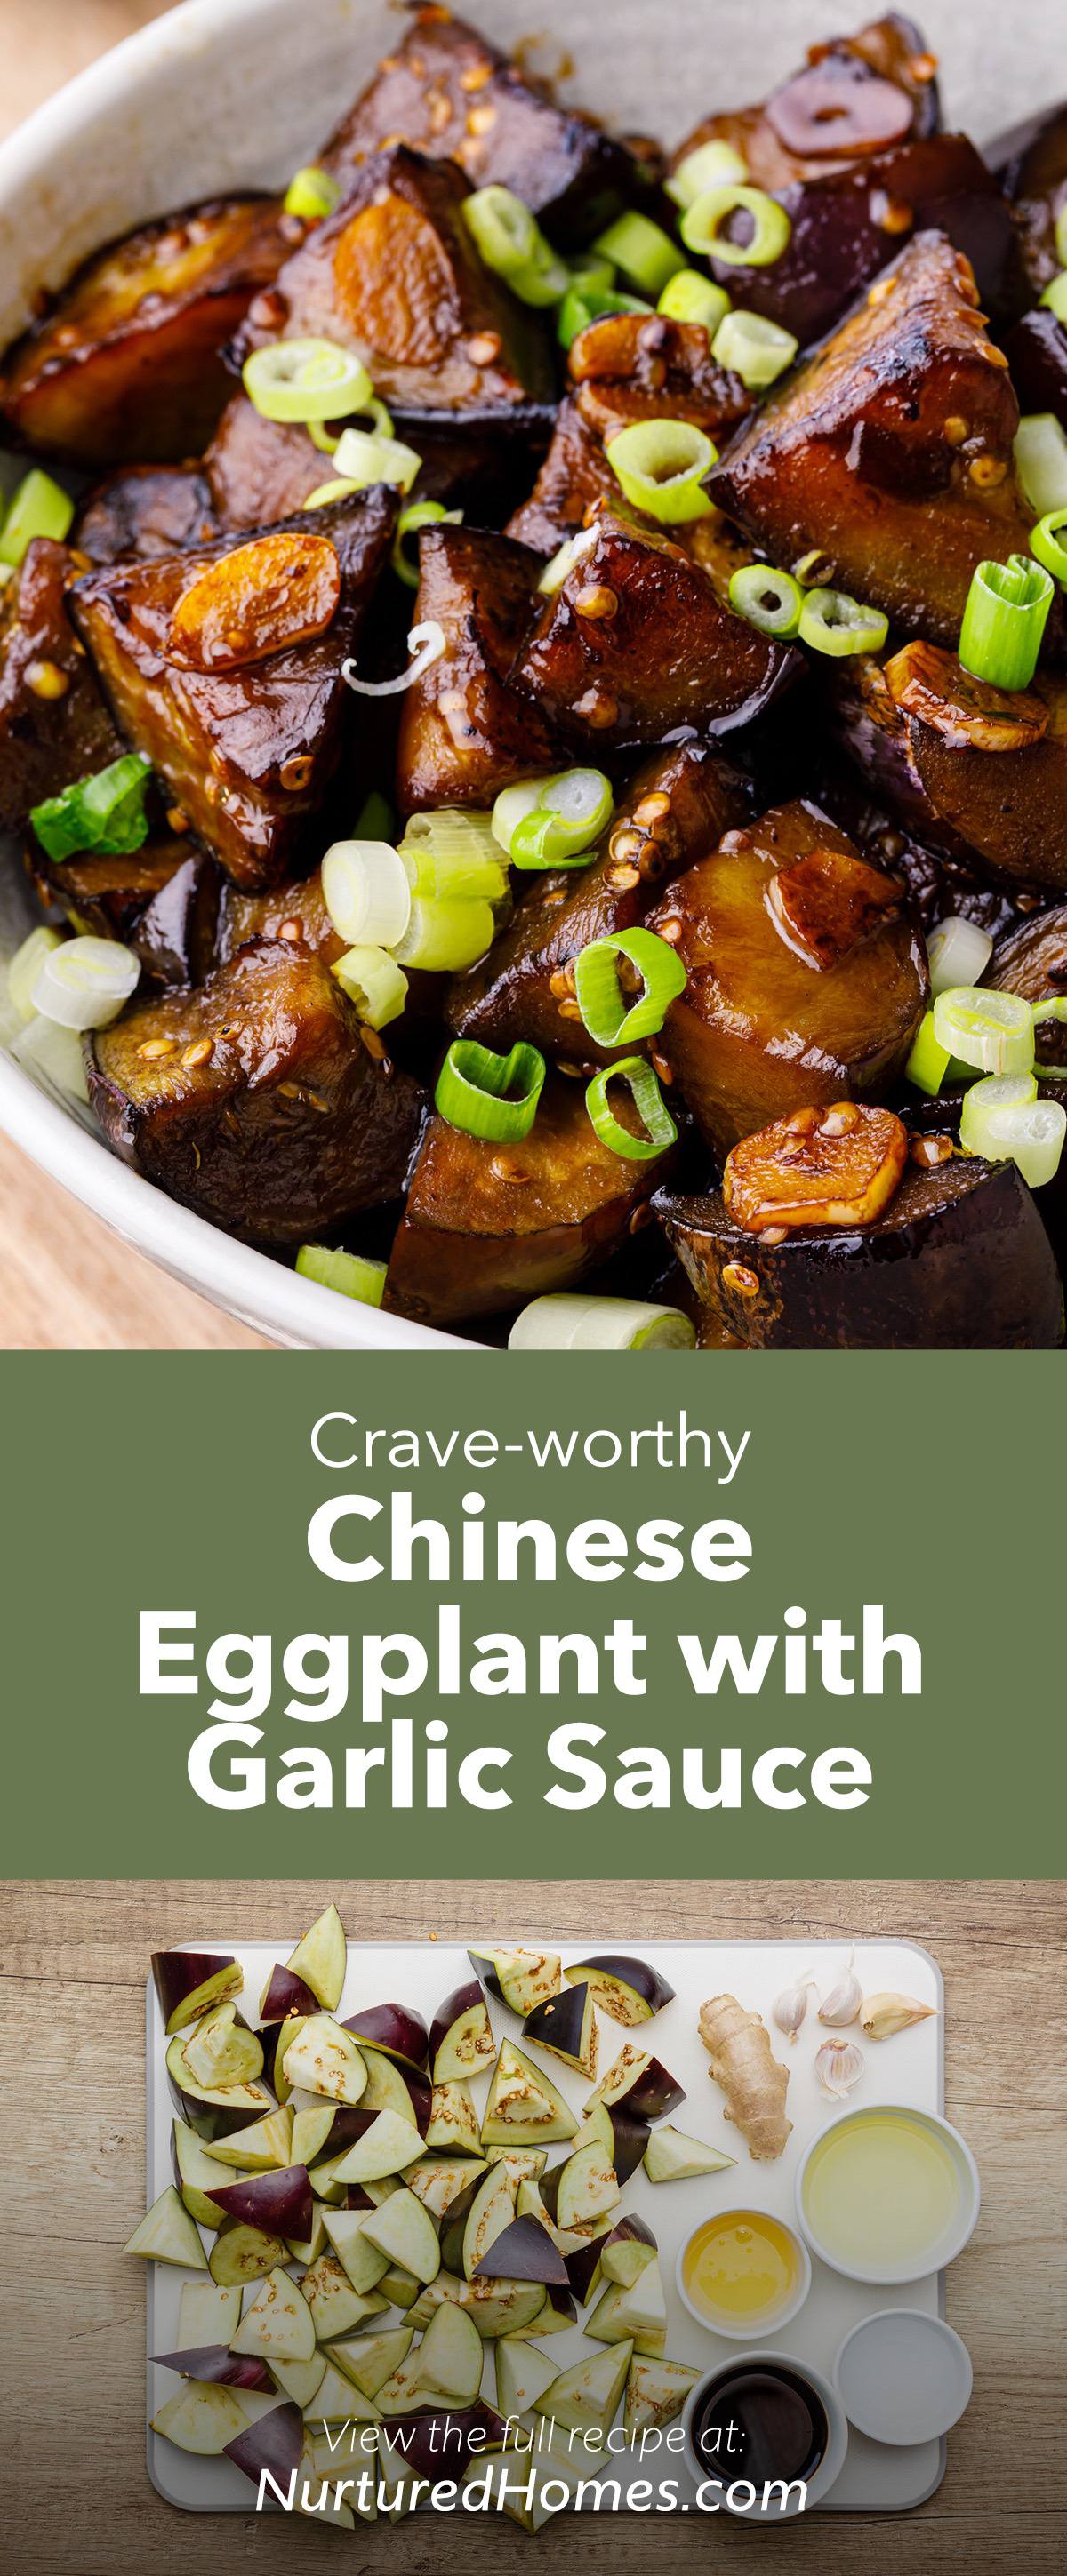 Crave-worthy Chinese Eggplant with Garlic Sauce